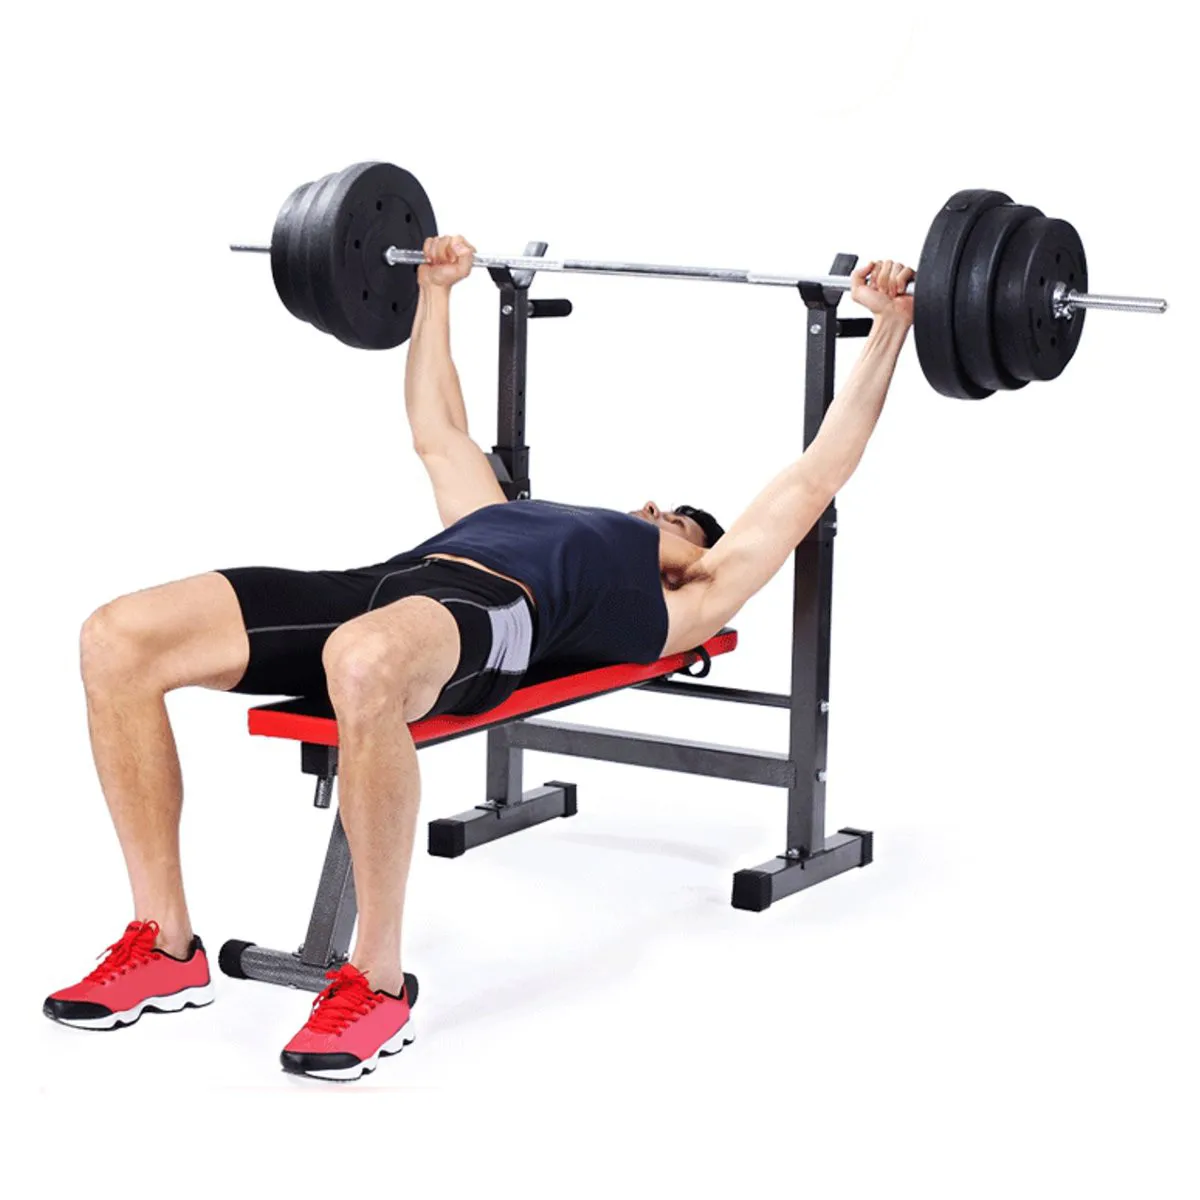 Weightlifting Bed Workout Adjustable Weight Bench Press With Squat Barbell Rack 